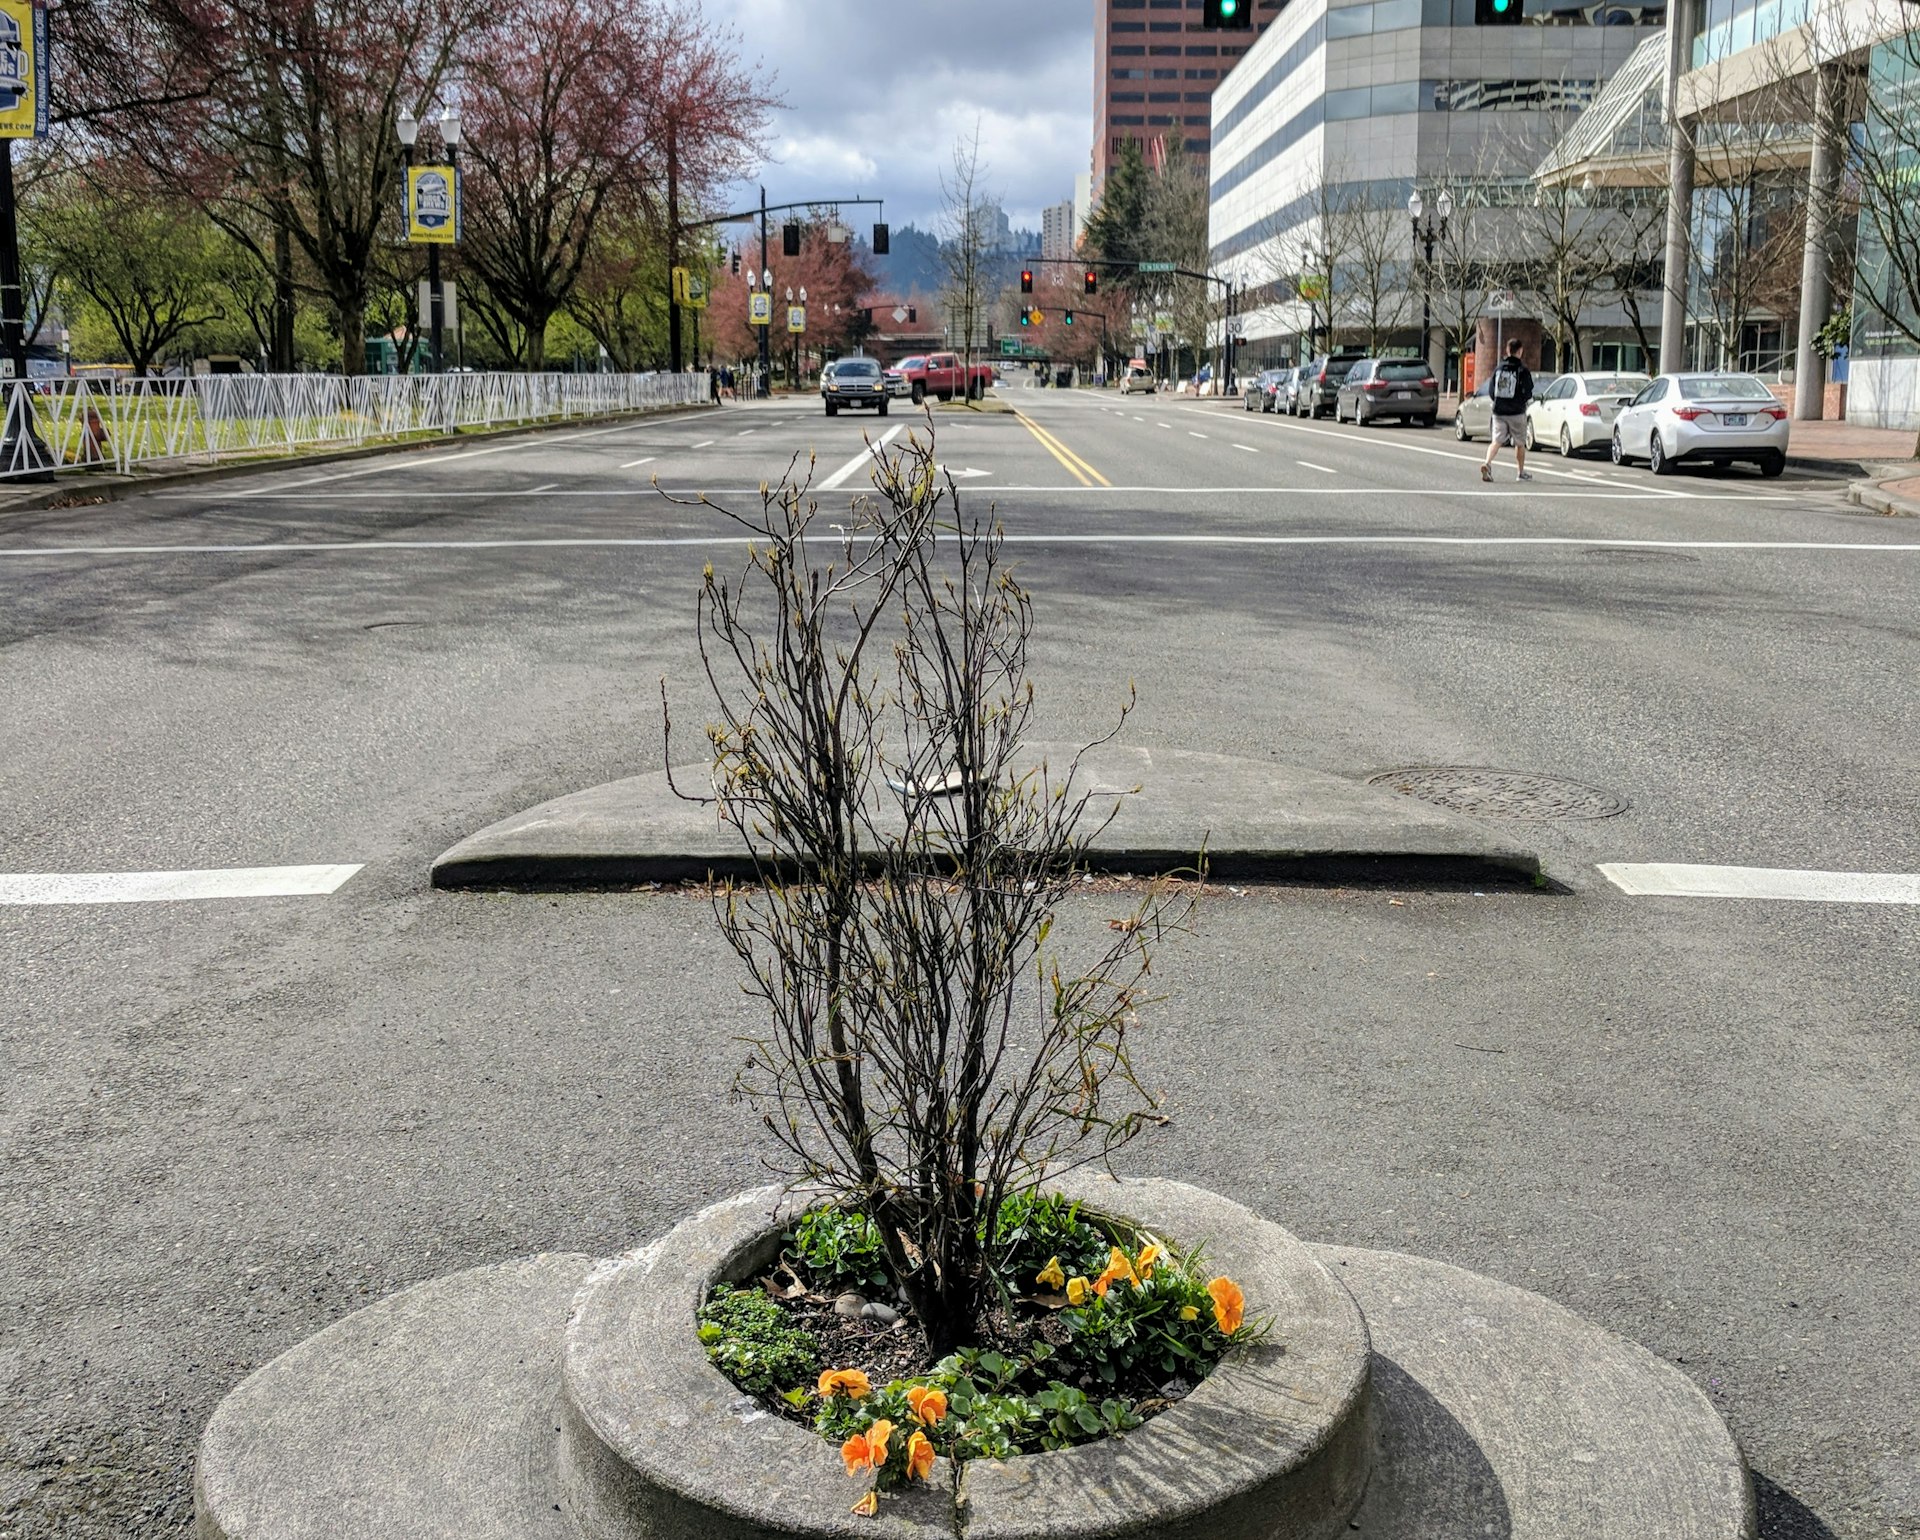 A tiny circular park is in the middle of a busy road in downtown Portland, Oregon. Orange flowers are planted in it, along with a tree. On the horizon, you can see the outline of skyscraper and trees.